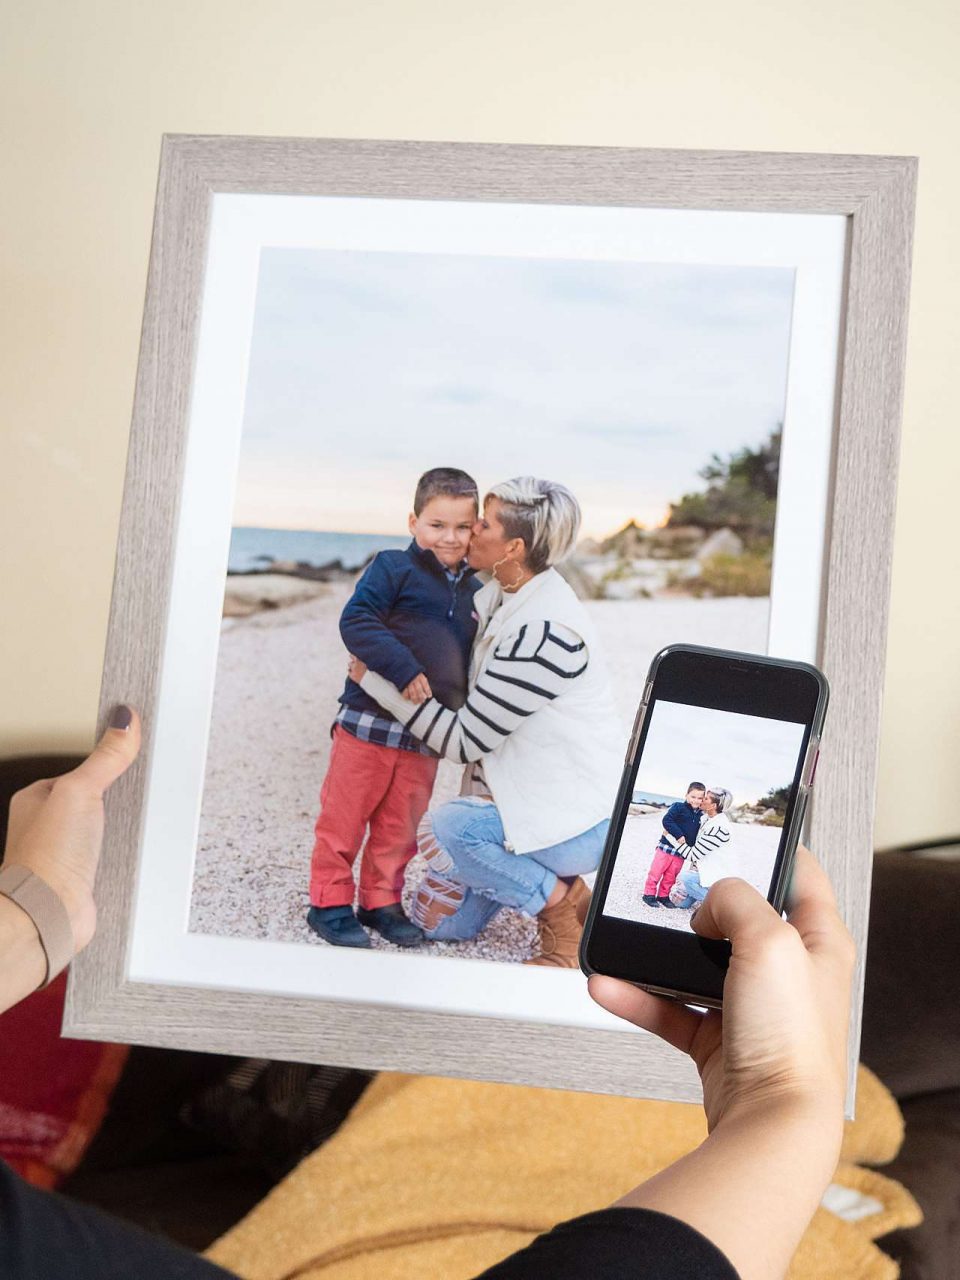 Phone taking picture of framed photo of mother and son